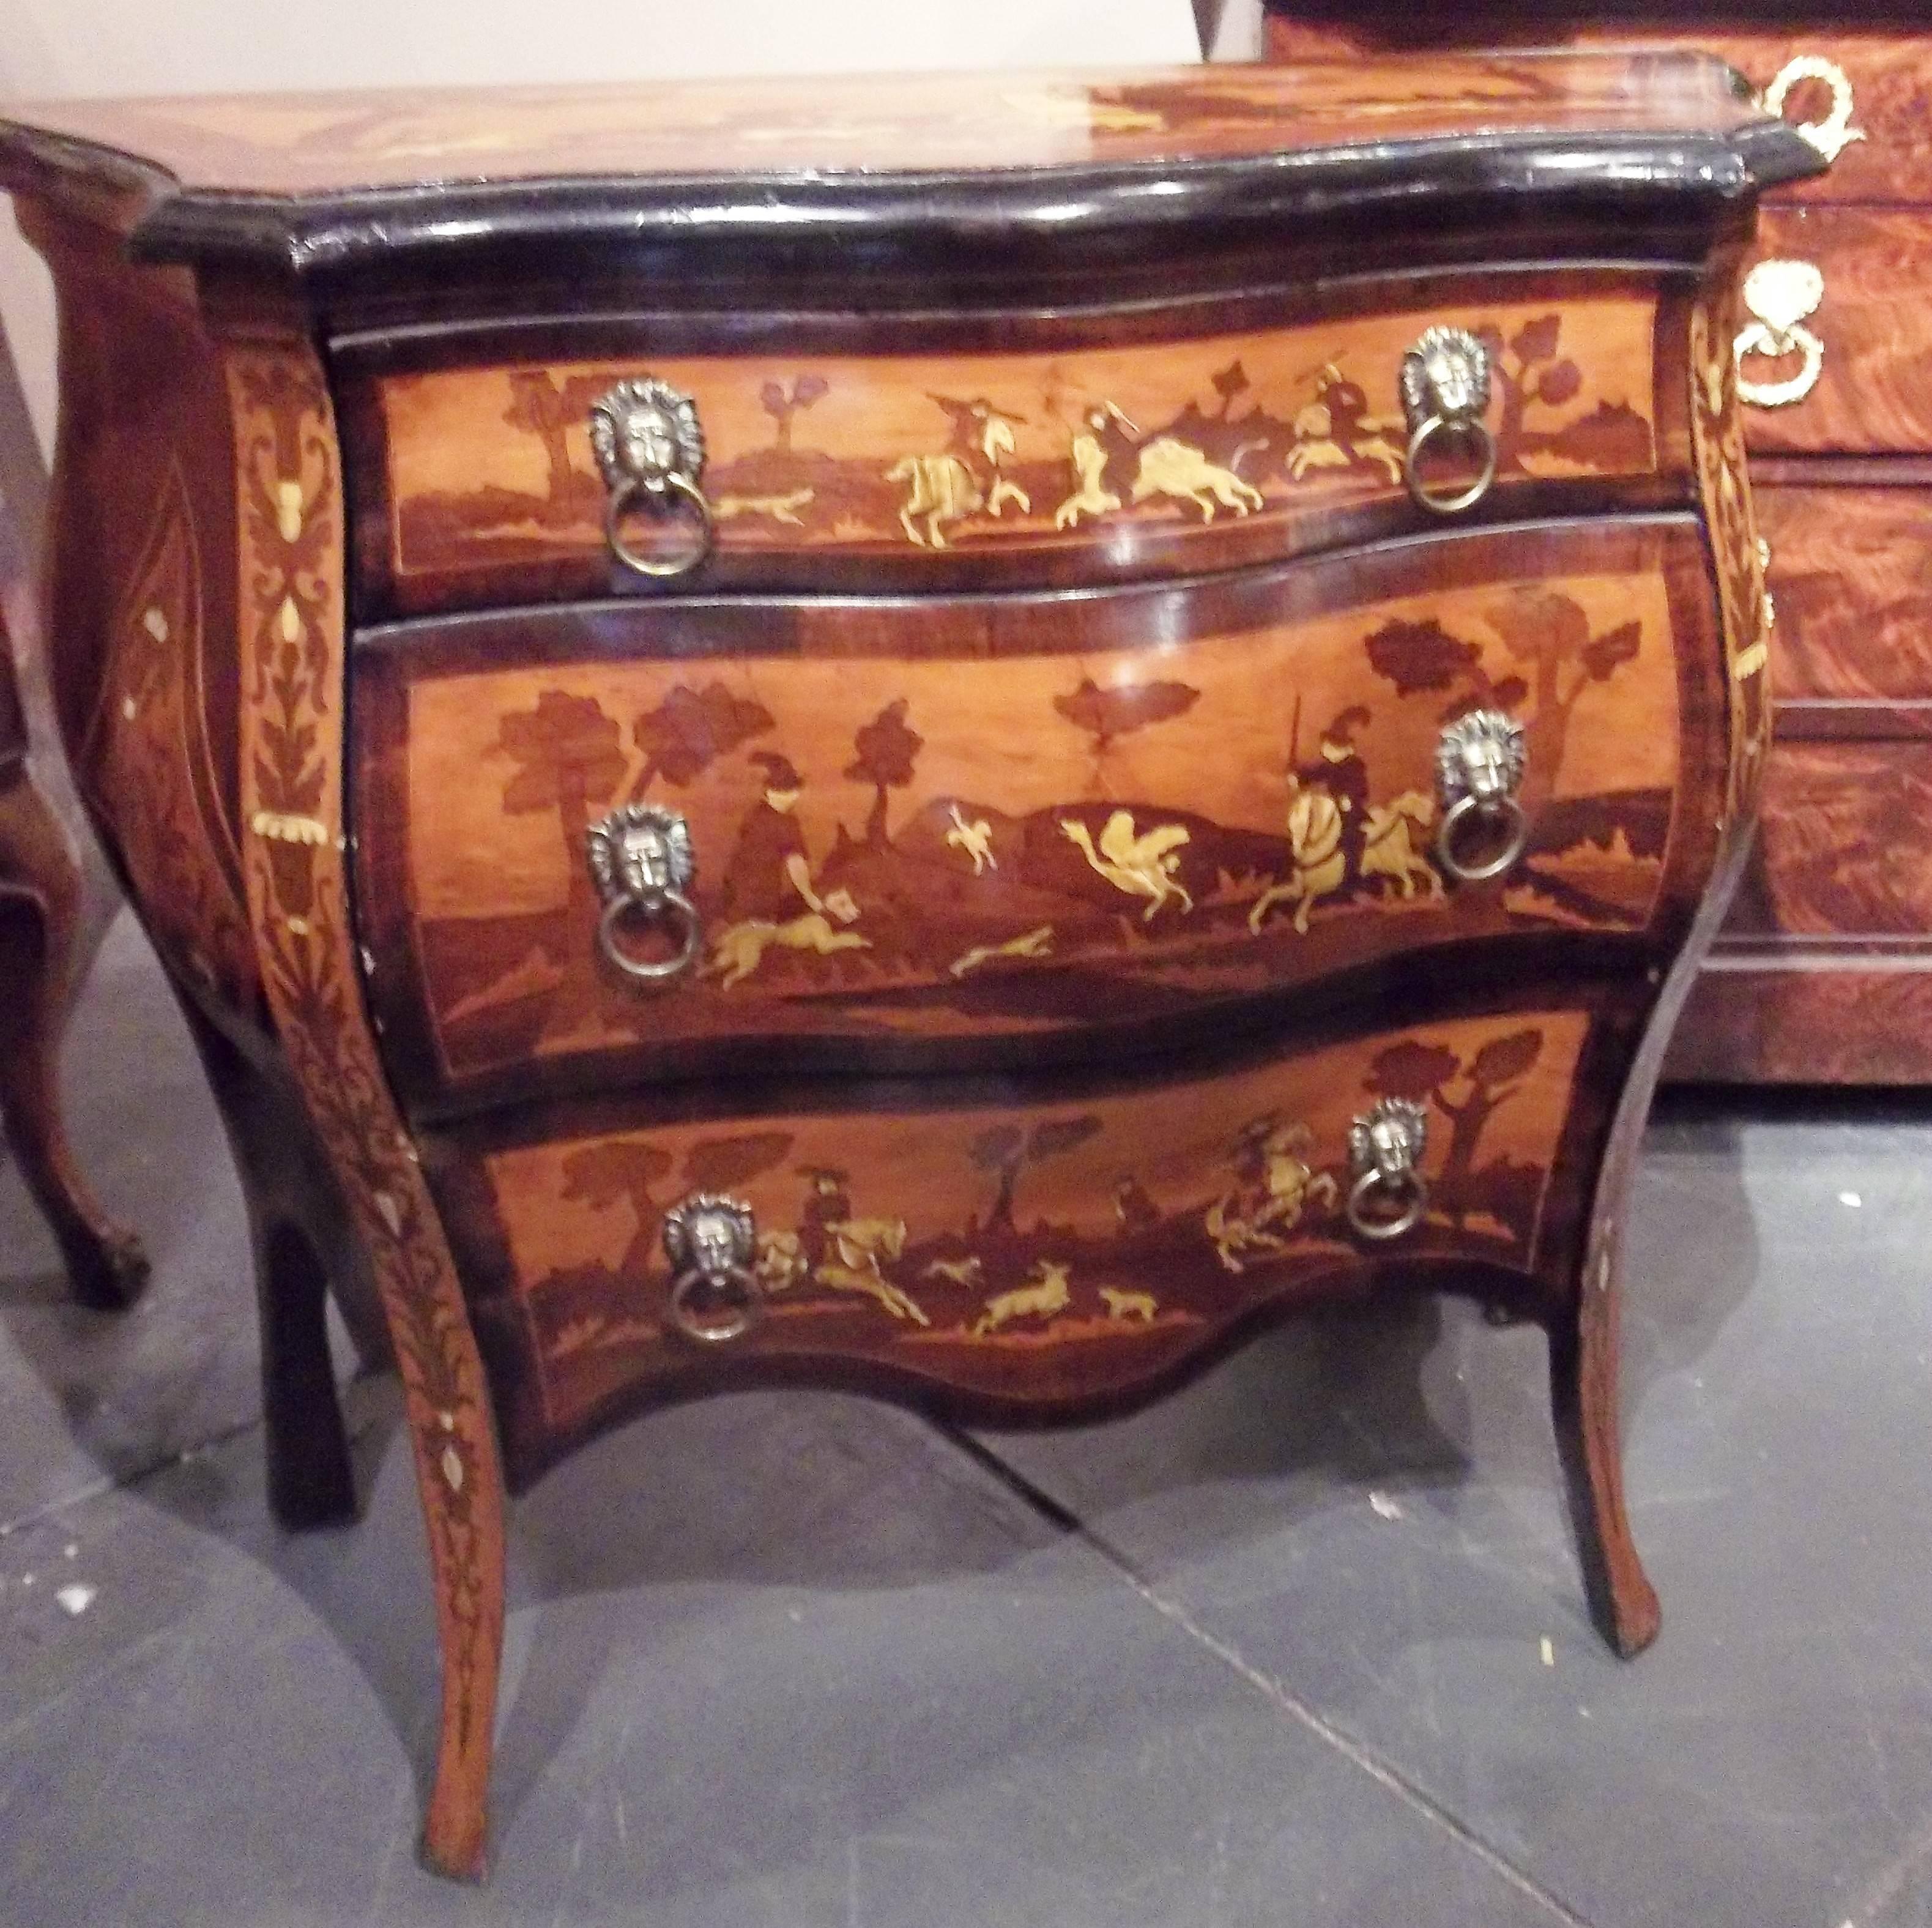 Top and three drawers in a hunt scene marquetry with bone inlay. The sides in a floral inlaid diamond. Some ebonized trim. Probably Austria due to the pronounced Rococo bombe form. A Grand Tour equivalent of a black forest furniture souvenir. 

Very